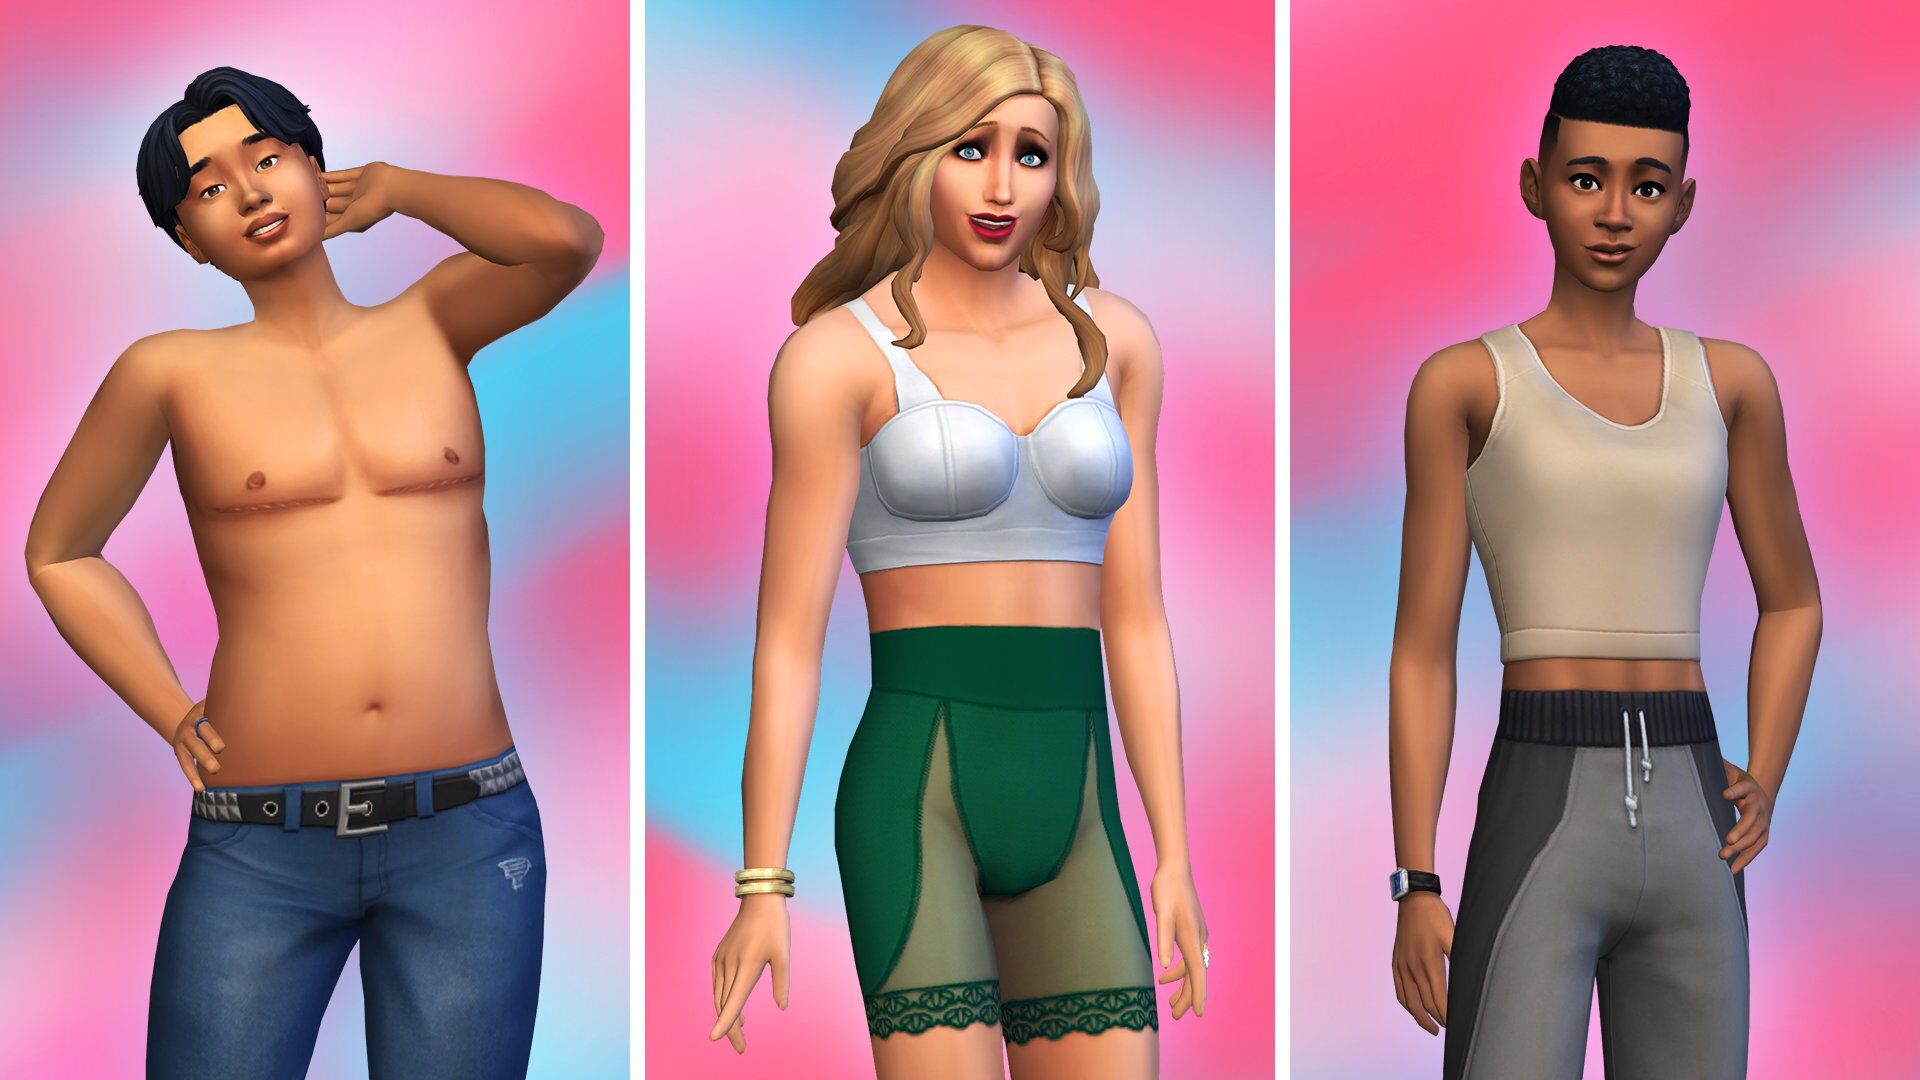 &#8220;The Sims&#8221; adds top surgery scars and chest binders in new update